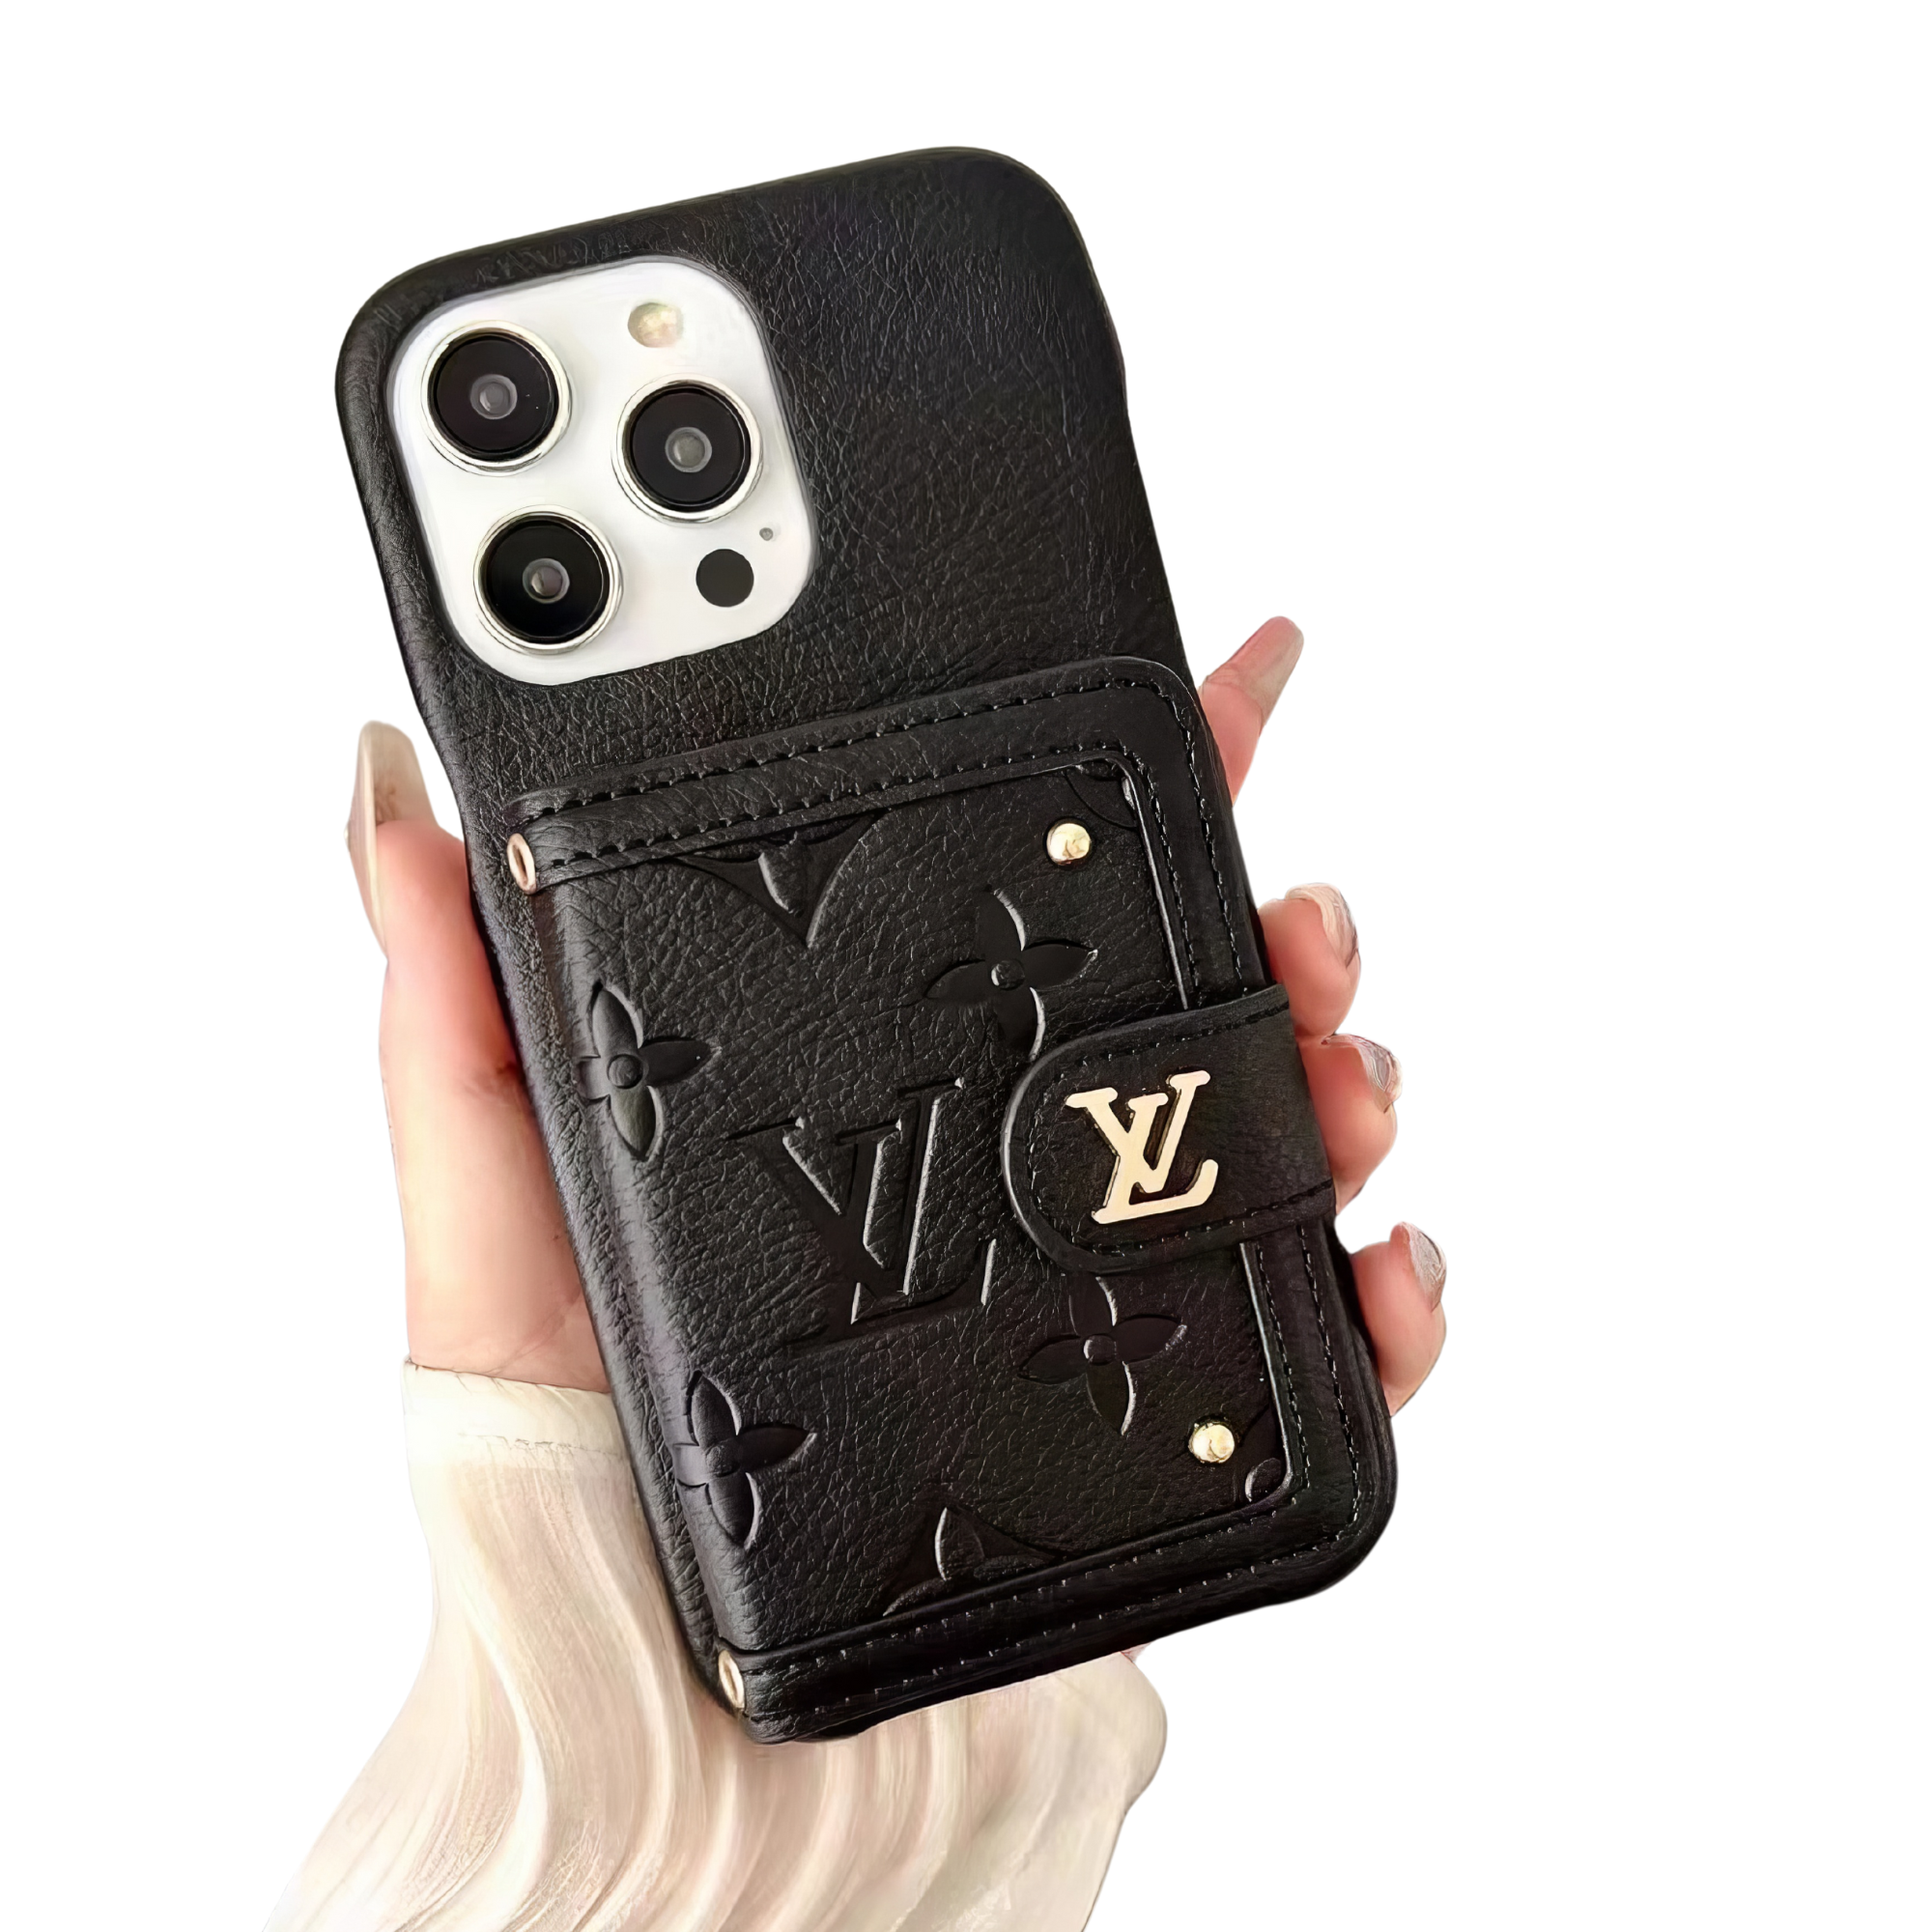 Black Louis Vuitton leather iPhone case with card holder and monogram pattern.